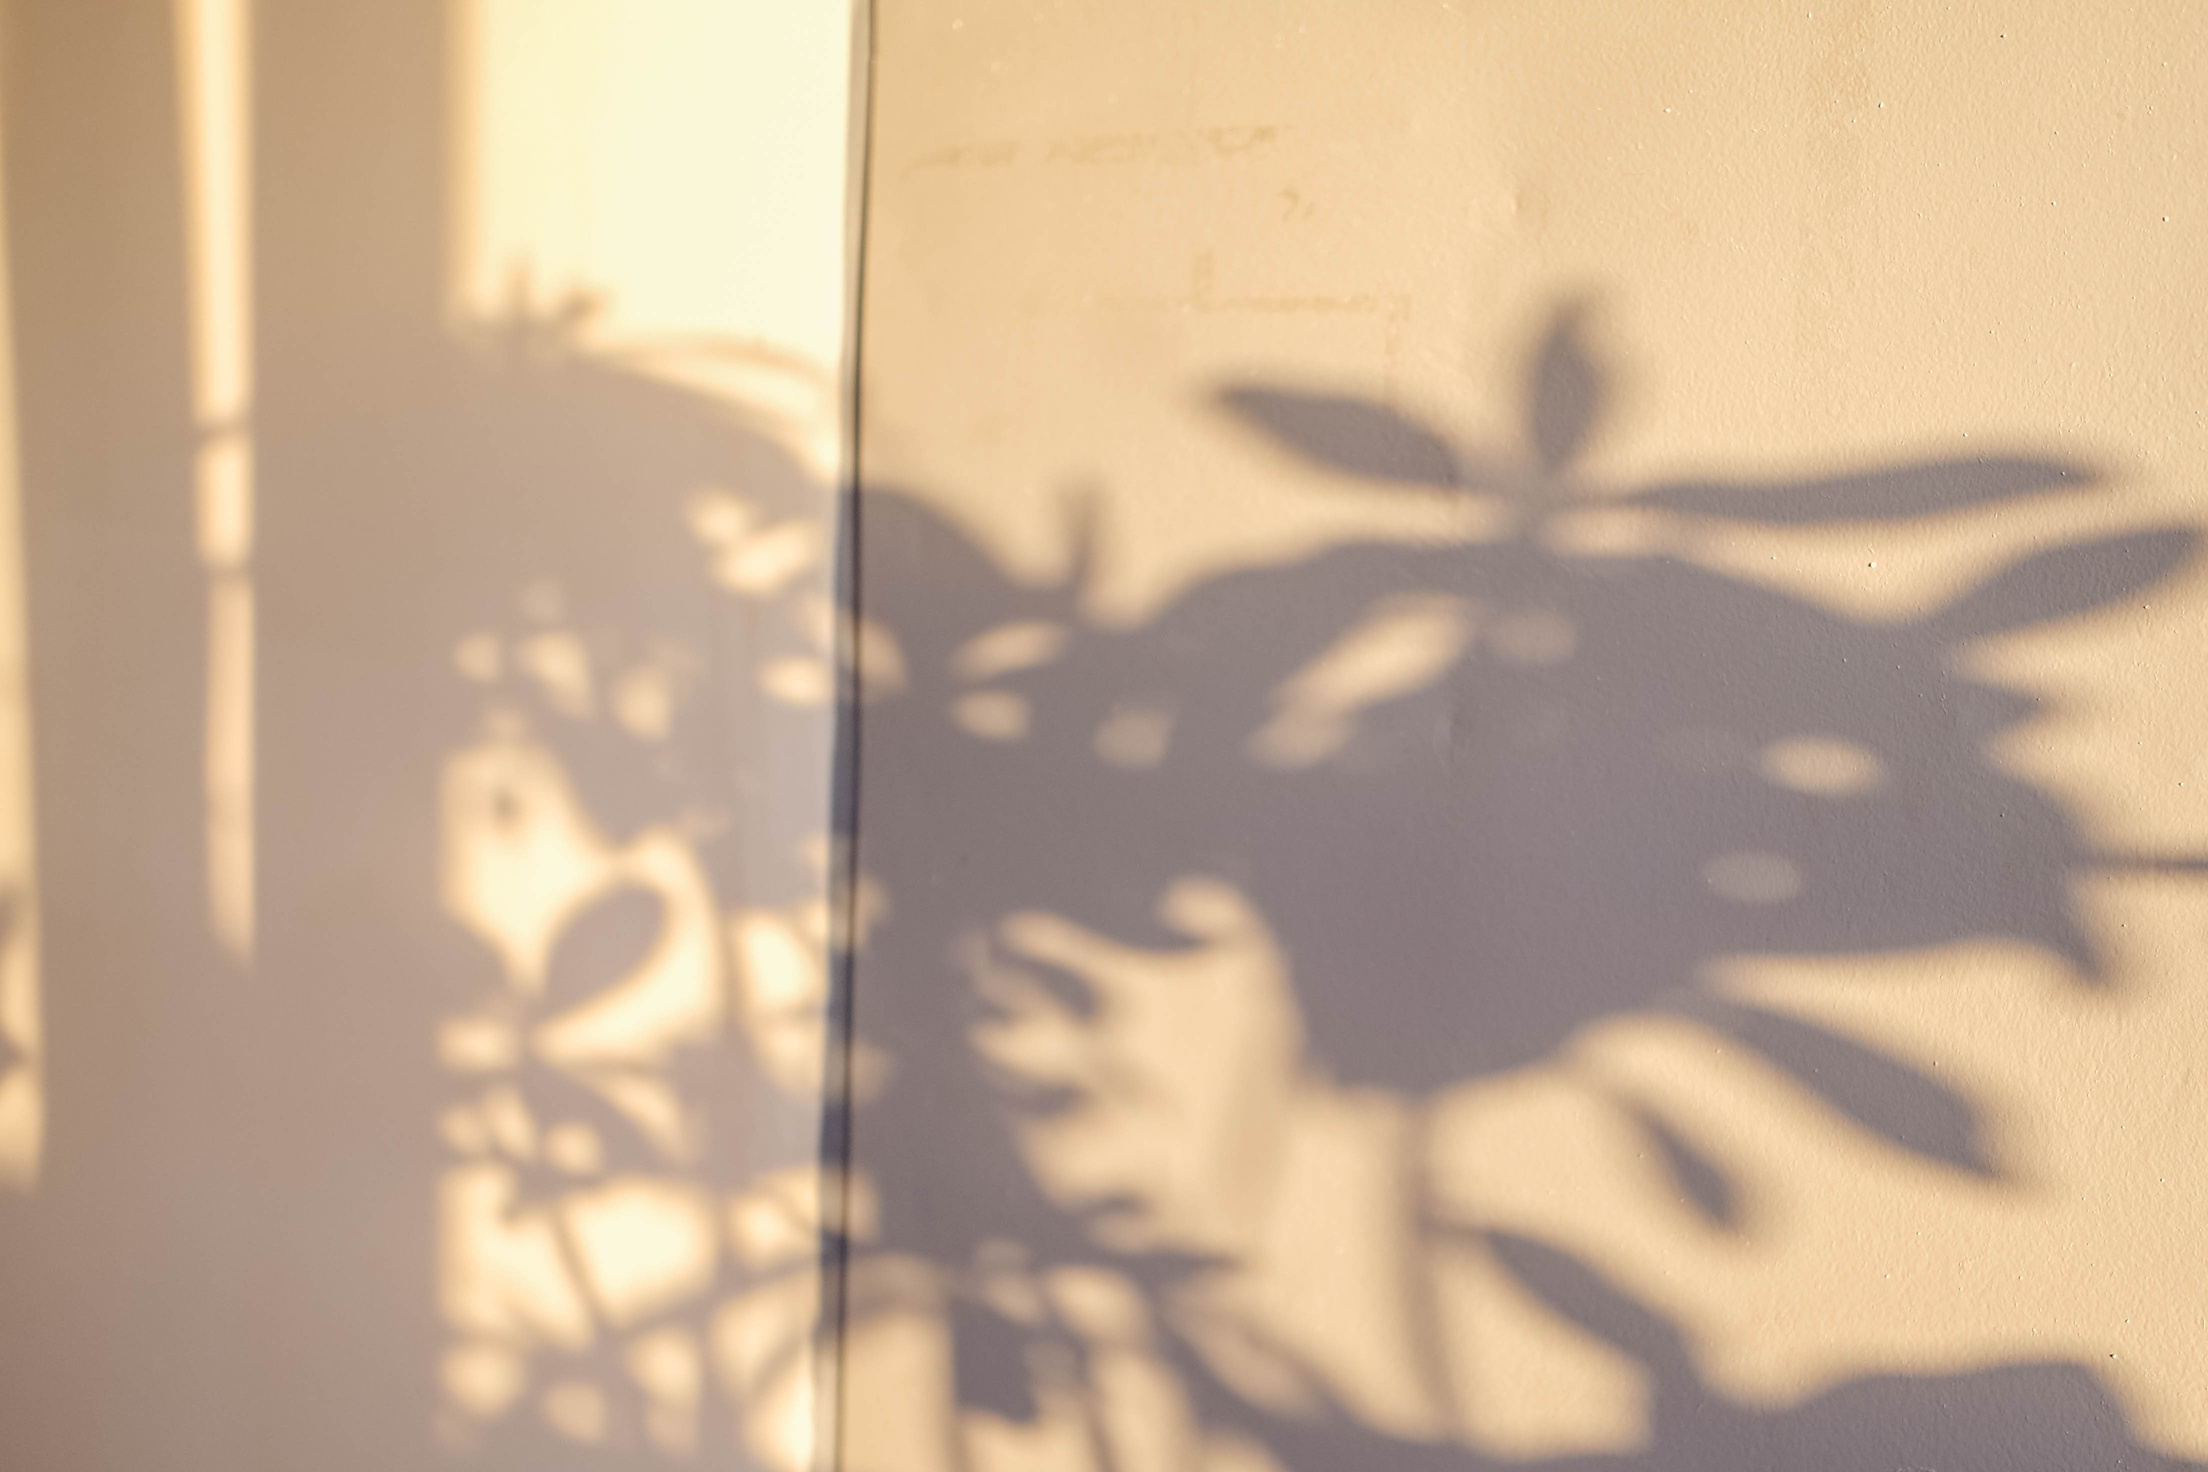 Aesthetics of the shadow of plants on the wall